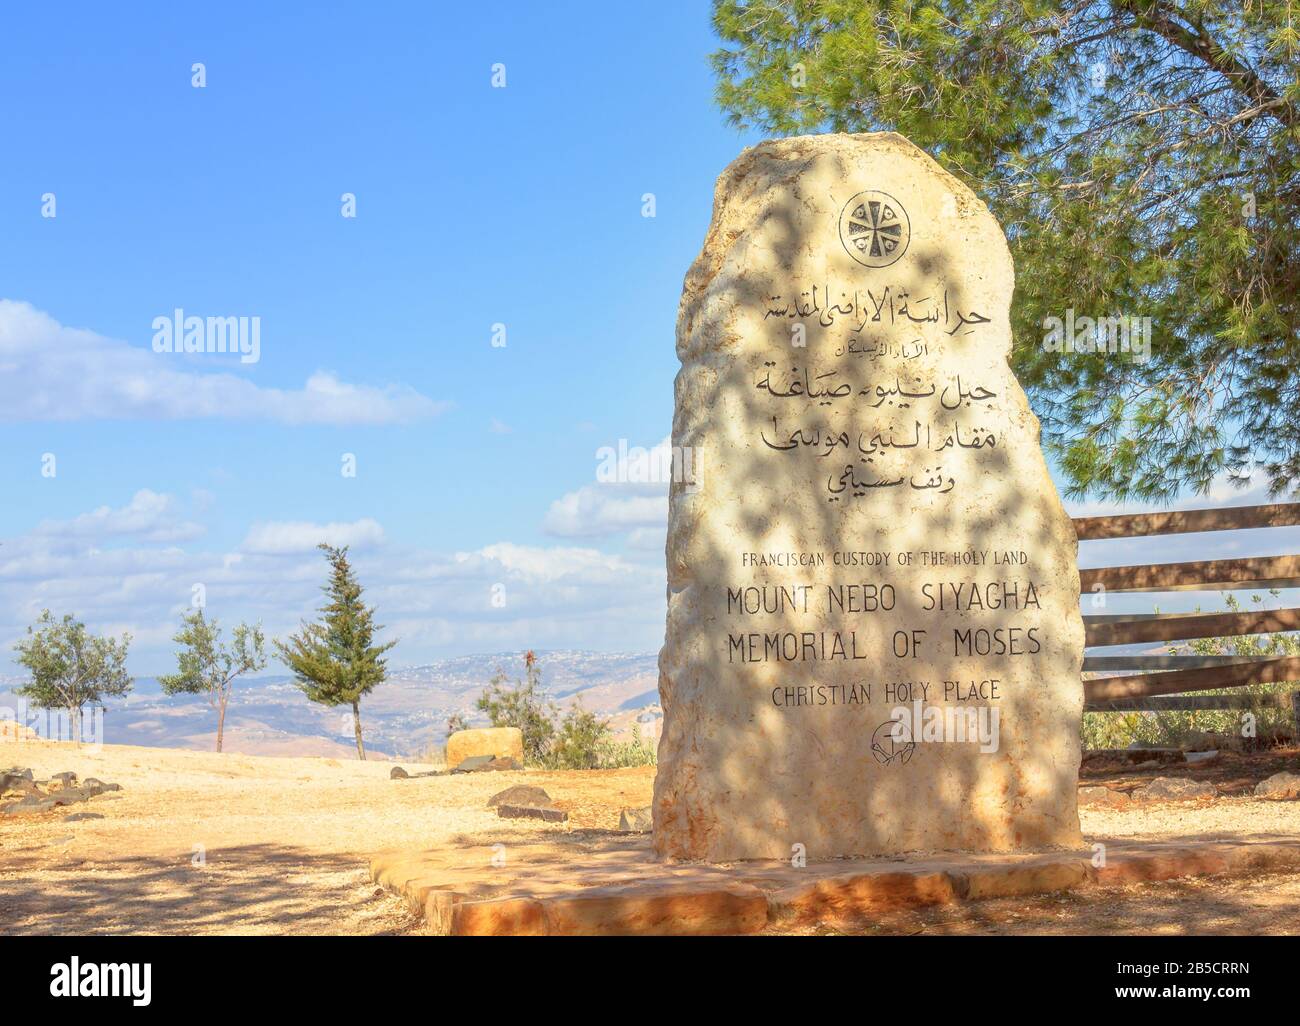 Mount Nebo, Jordan - Jan 3, 2020: Memorial stone of Moses of Promised Land at Mount Nebo, 710 meters above sea level. The view from the summit a Stock Photo